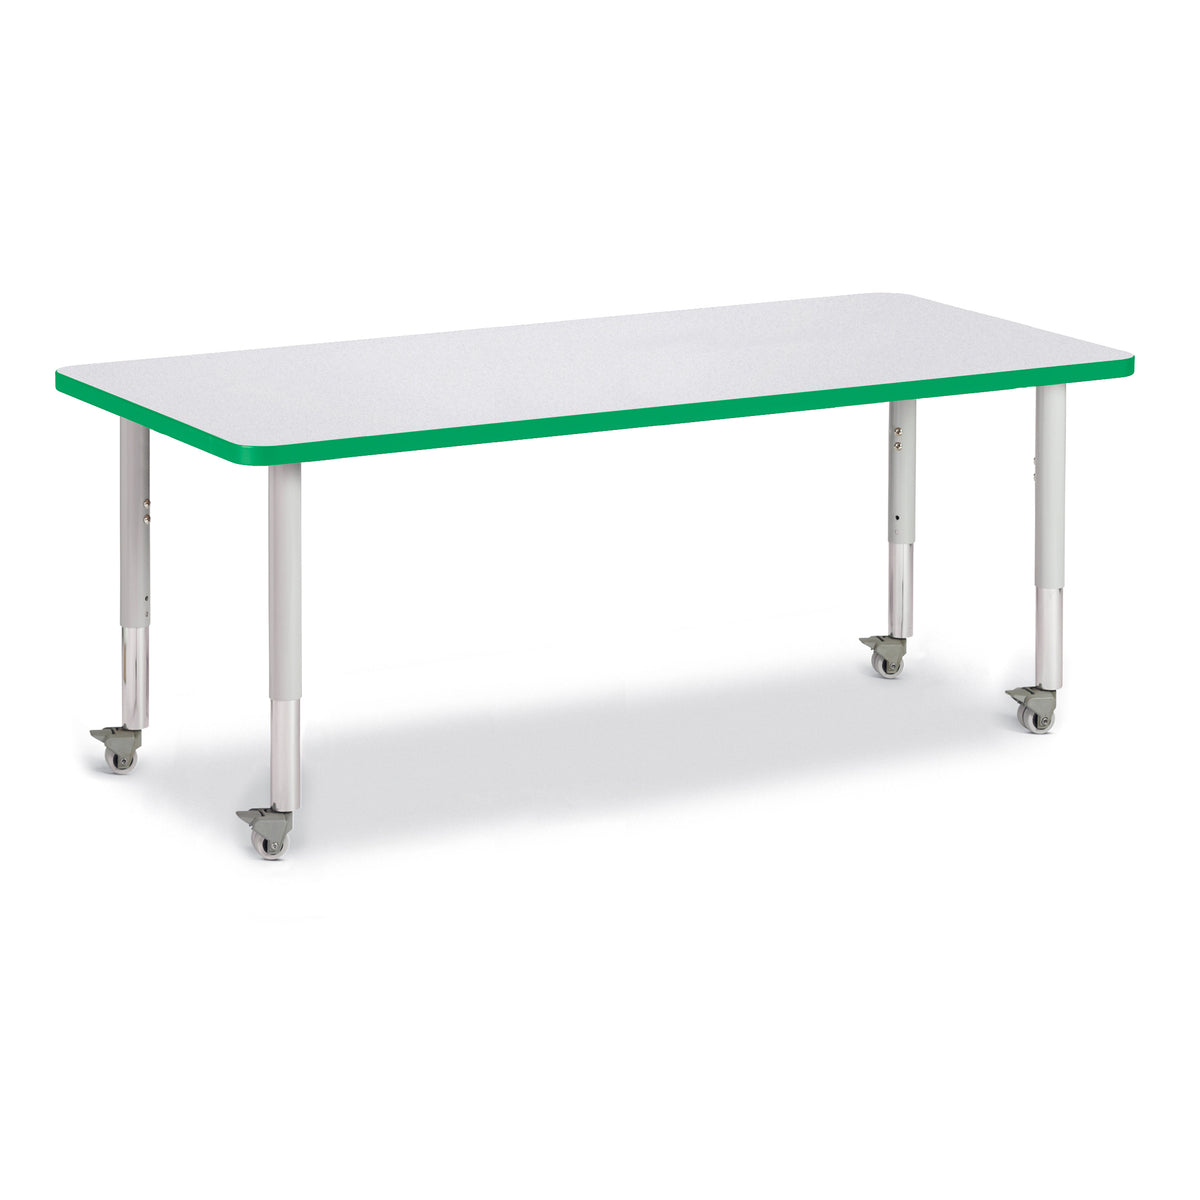 6413JCM119, Berries Rectangle Activity Table - 30" X 72", Mobile - Freckled Gray/Green/Gray